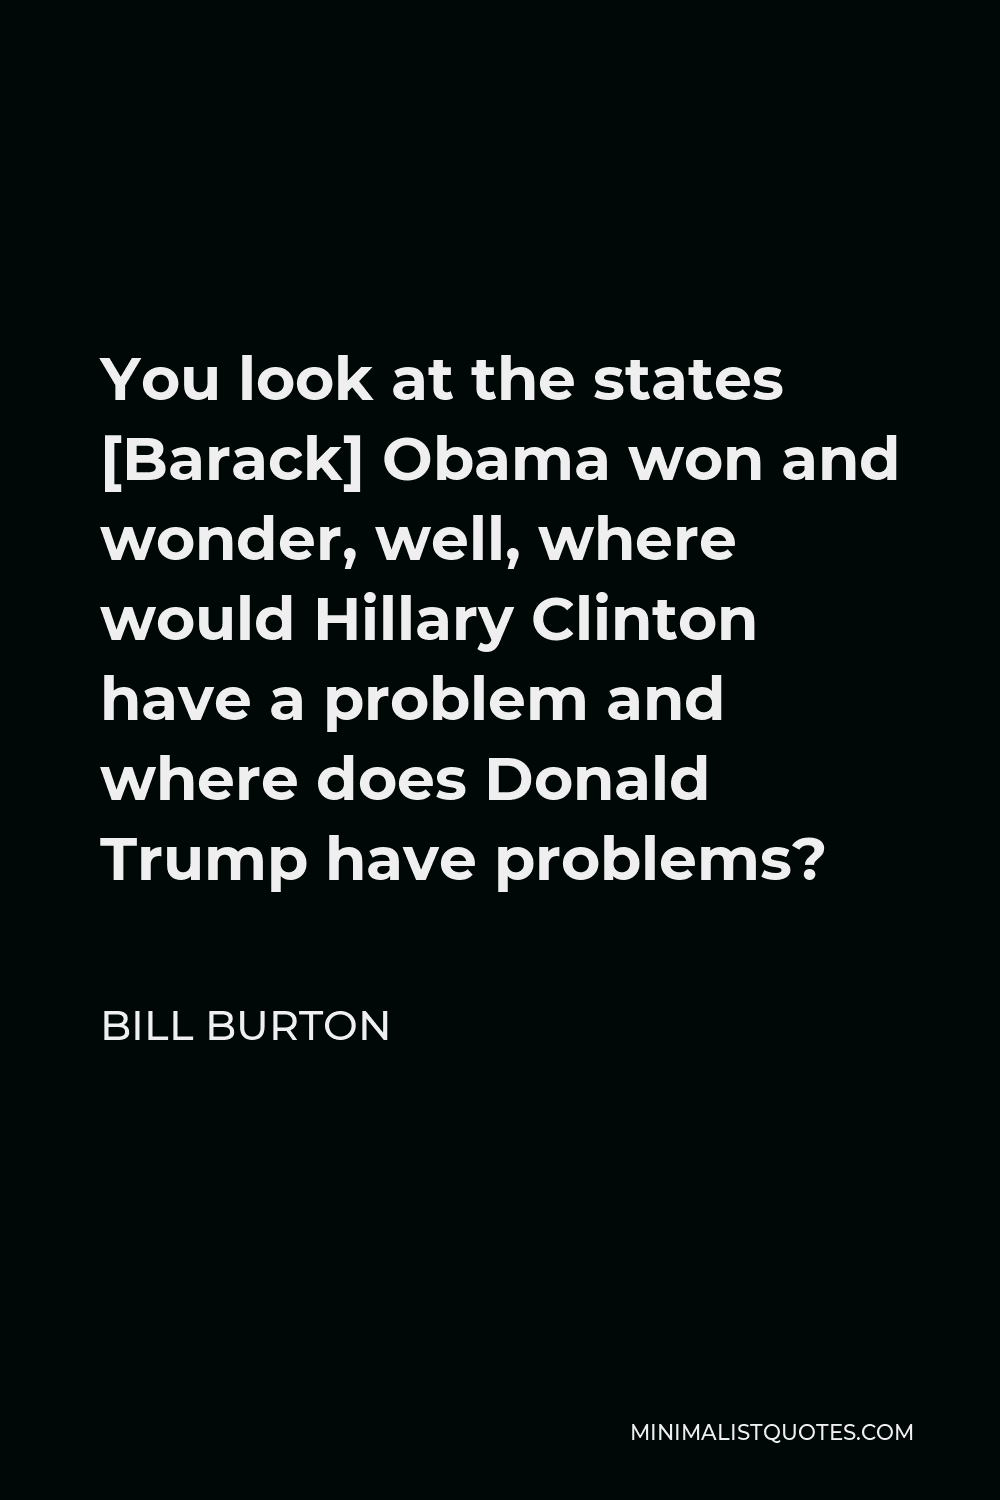 Bill Burton Quote - You look at the states [Barack] Obama won and wonder, well, where would Hillary Clinton have a problem and where does Donald Trump have problems?